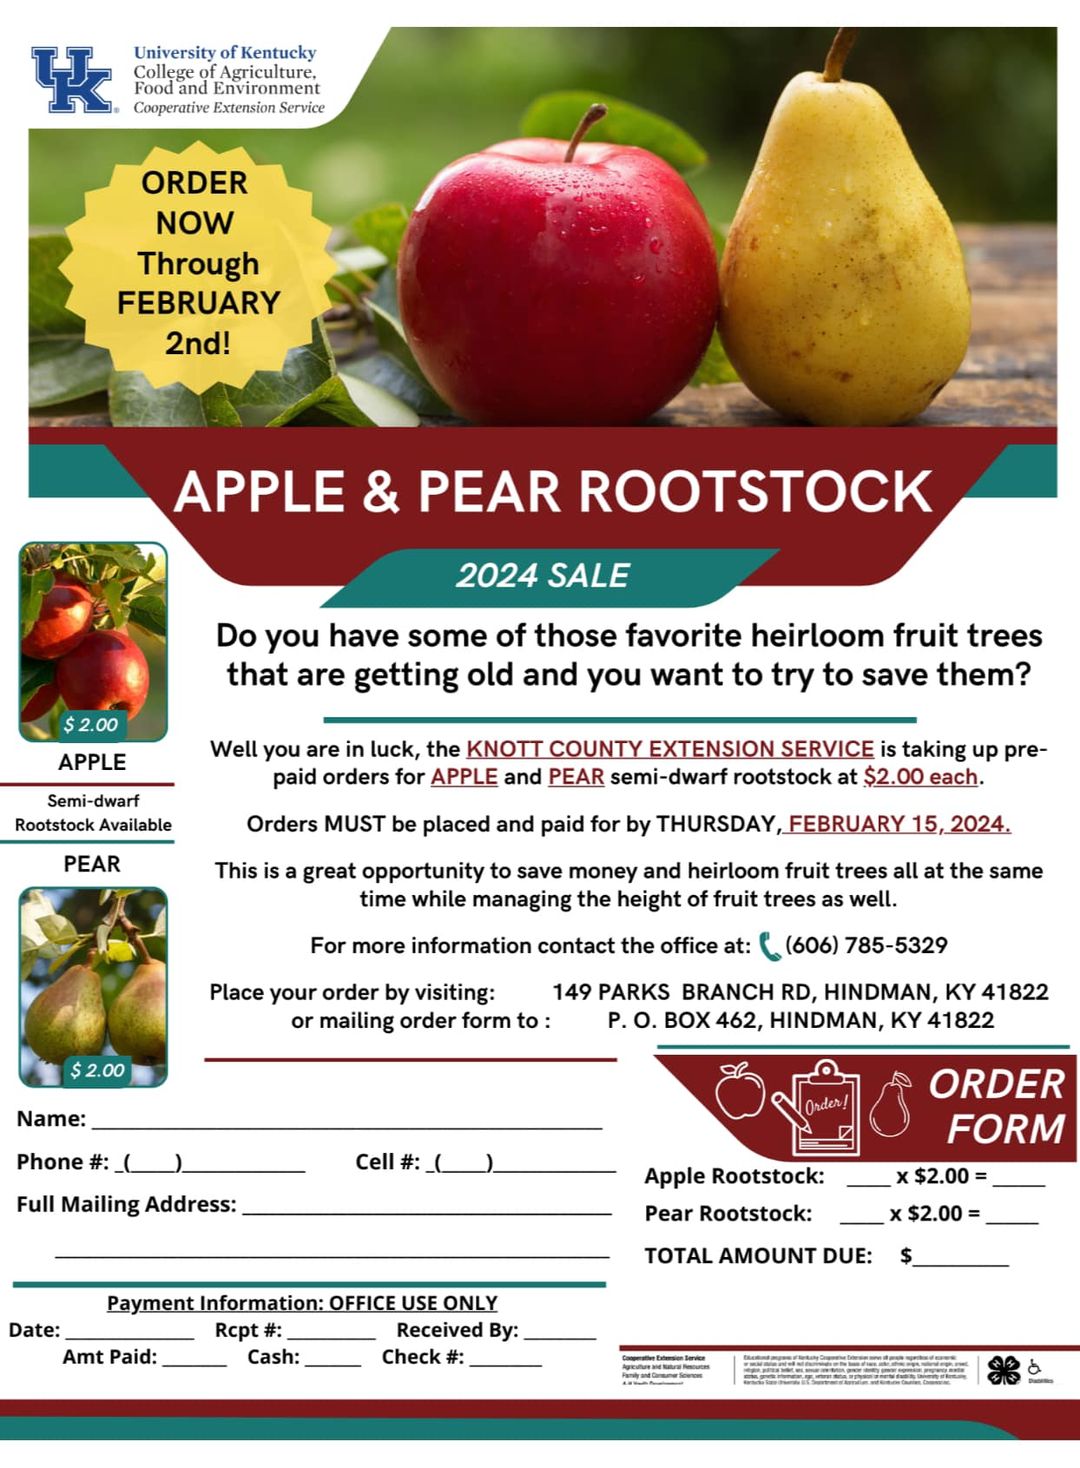 Apple & Pear Rootstock order form